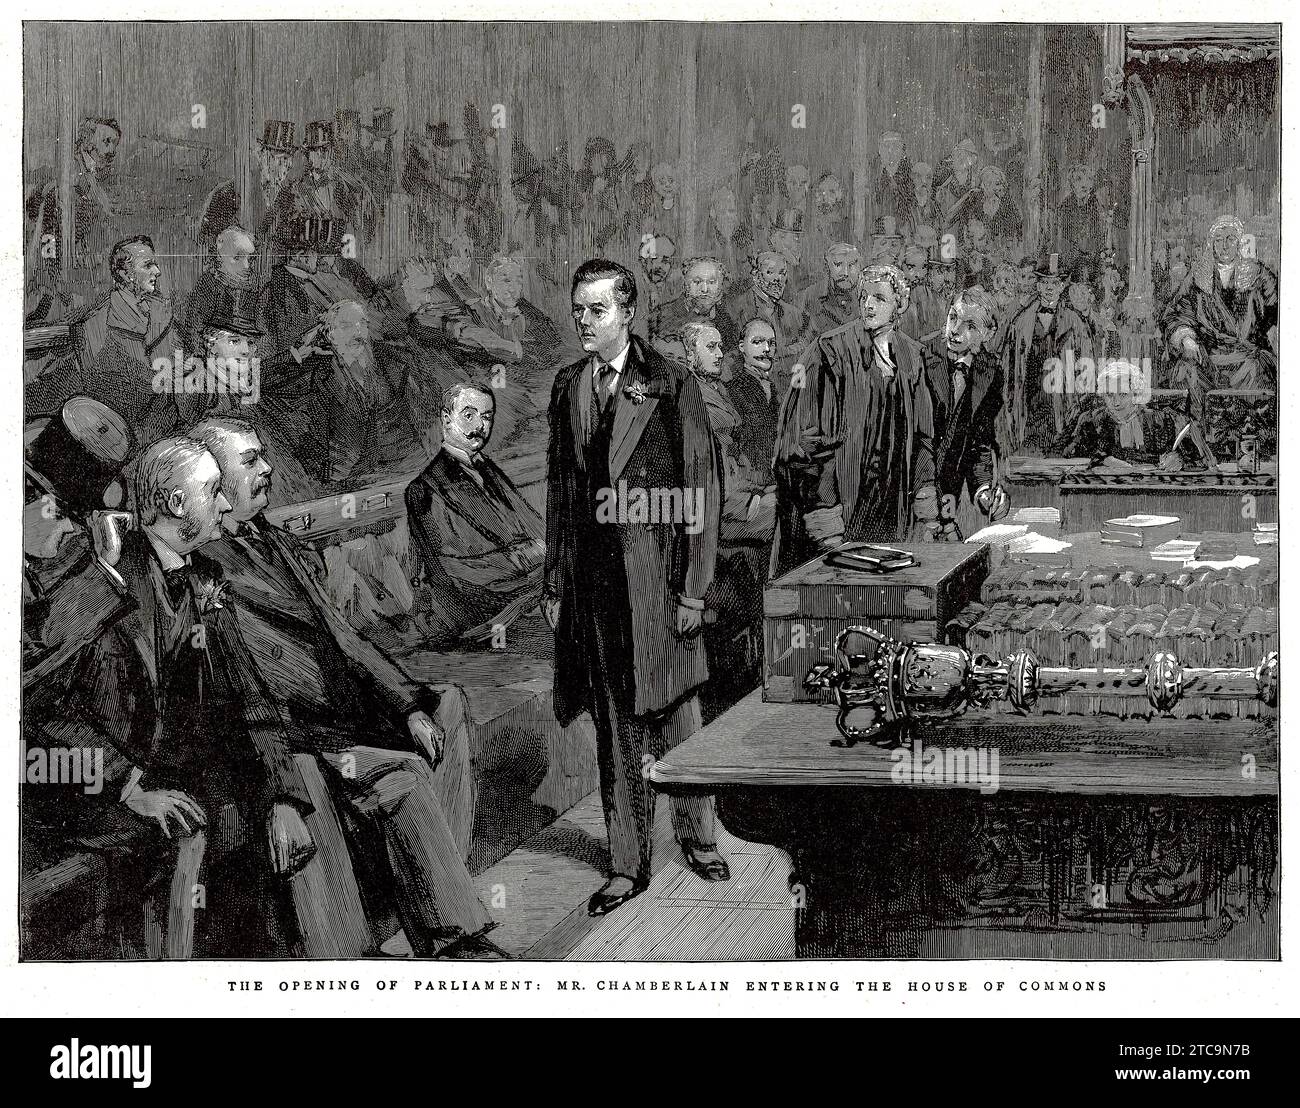 Mr Chamberlain entering the house of commons for the opening of parliament, published  1896 Stock Photo